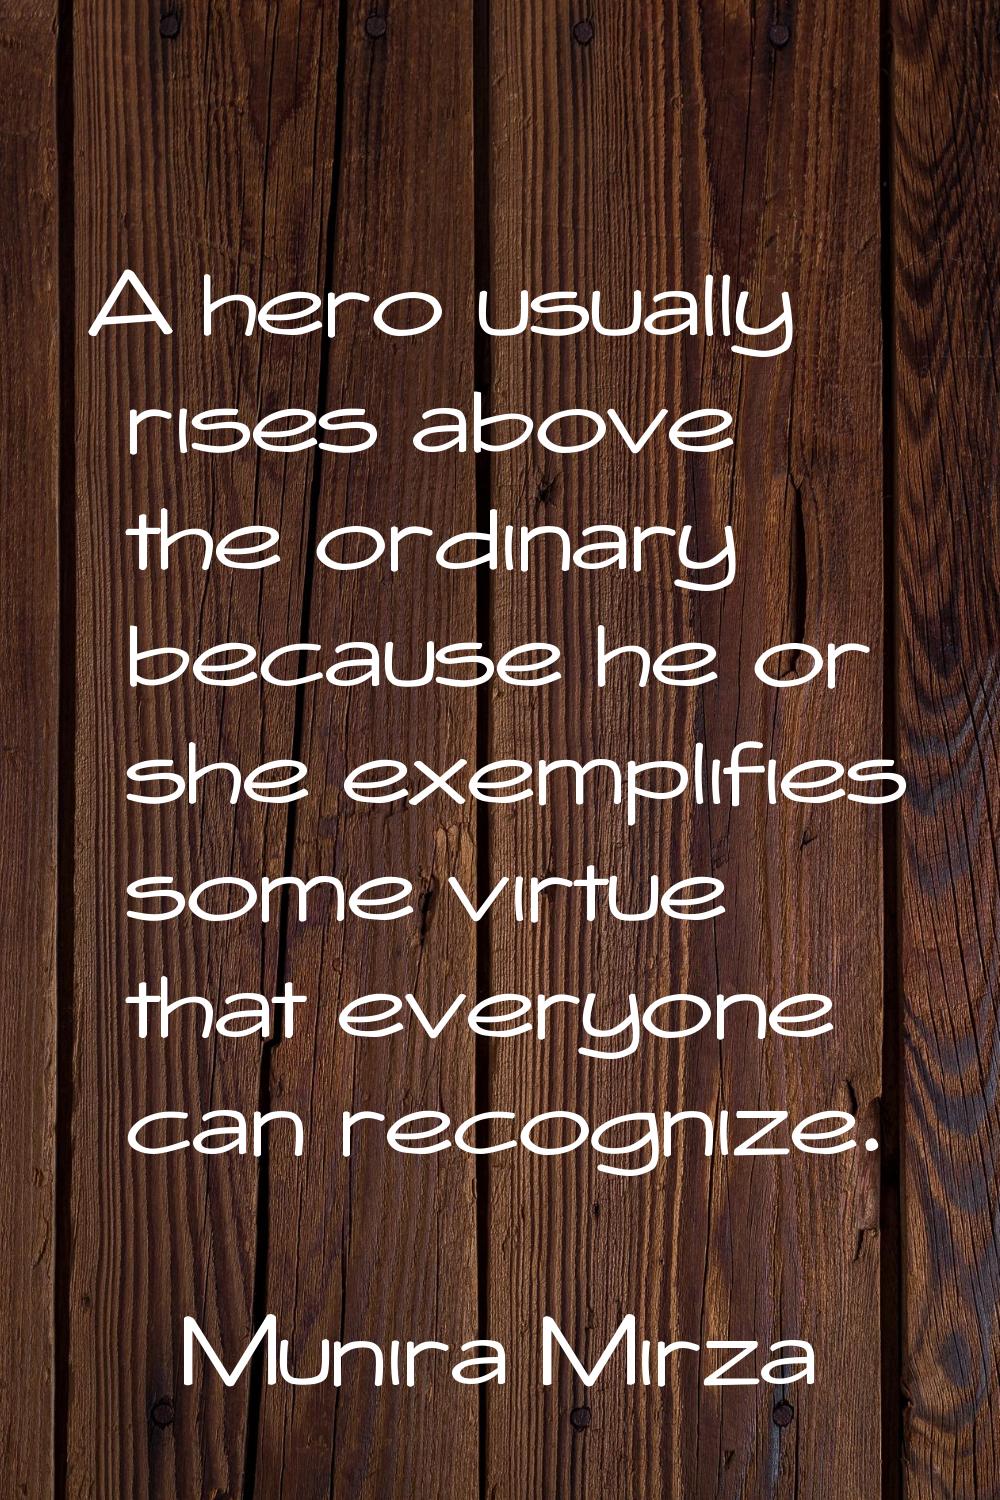 A hero usually rises above the ordinary because he or she exemplifies some virtue that everyone can